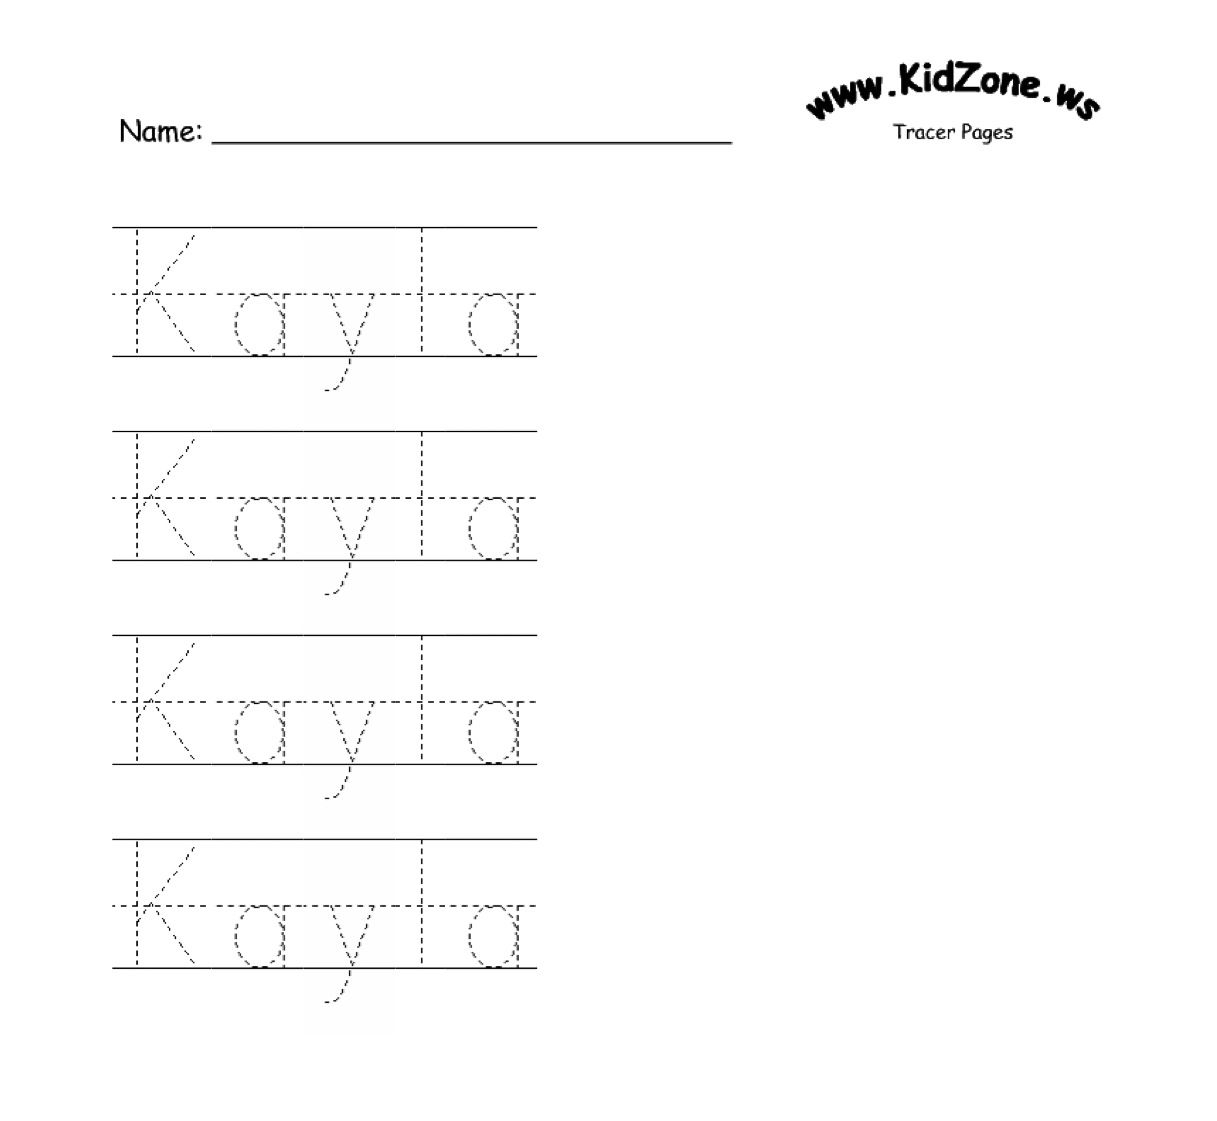 Custom Name Tracer Pages | Preschool Writing, Name Tracing intended for Name Tracing Generator Kindergarten